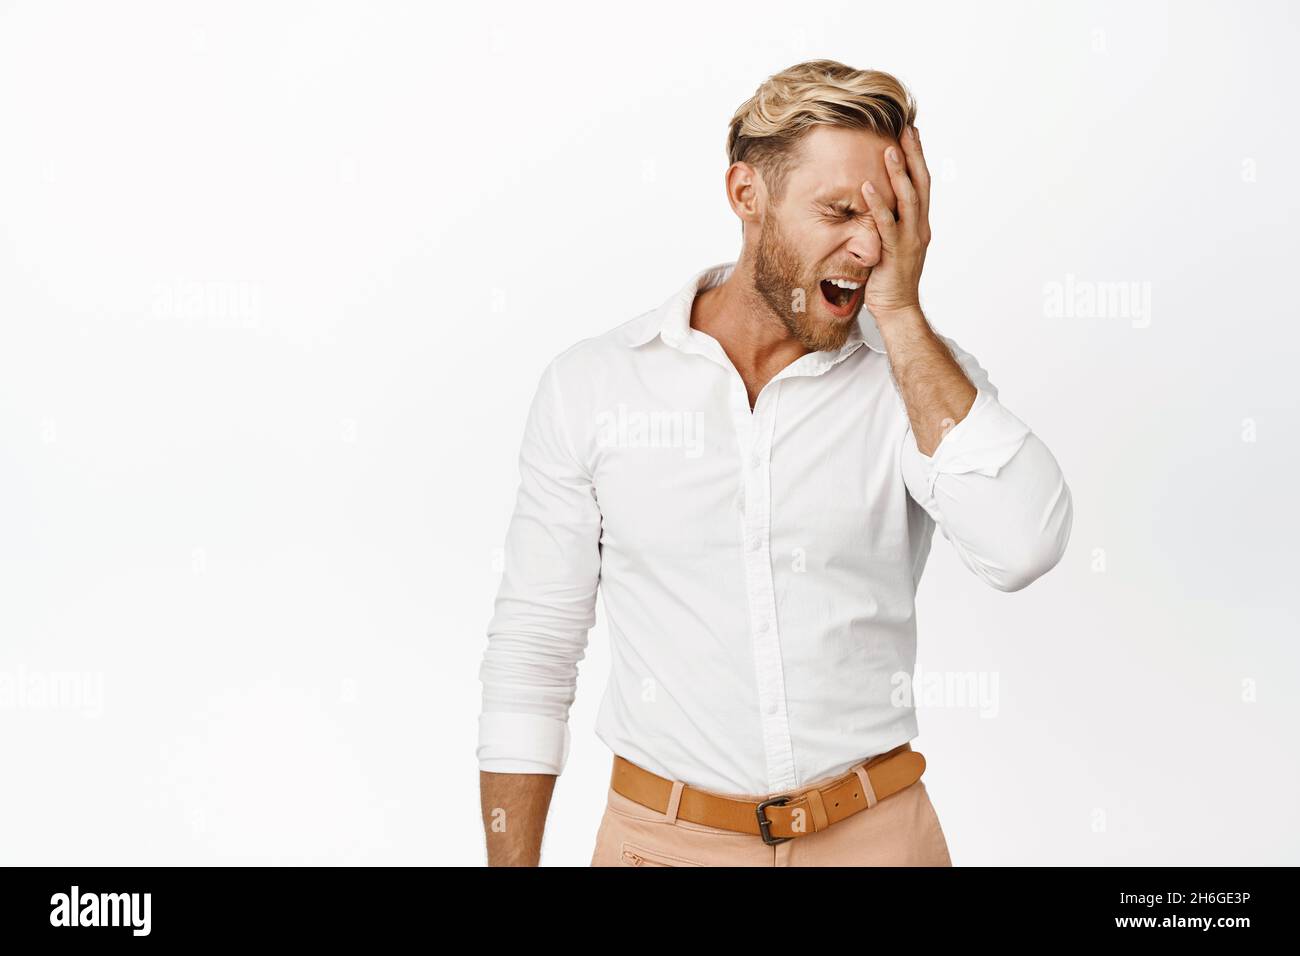 Failure. Frustrated blond man feeling disappointment, facepalm and screaming in despair, standing over white background Stock Photo